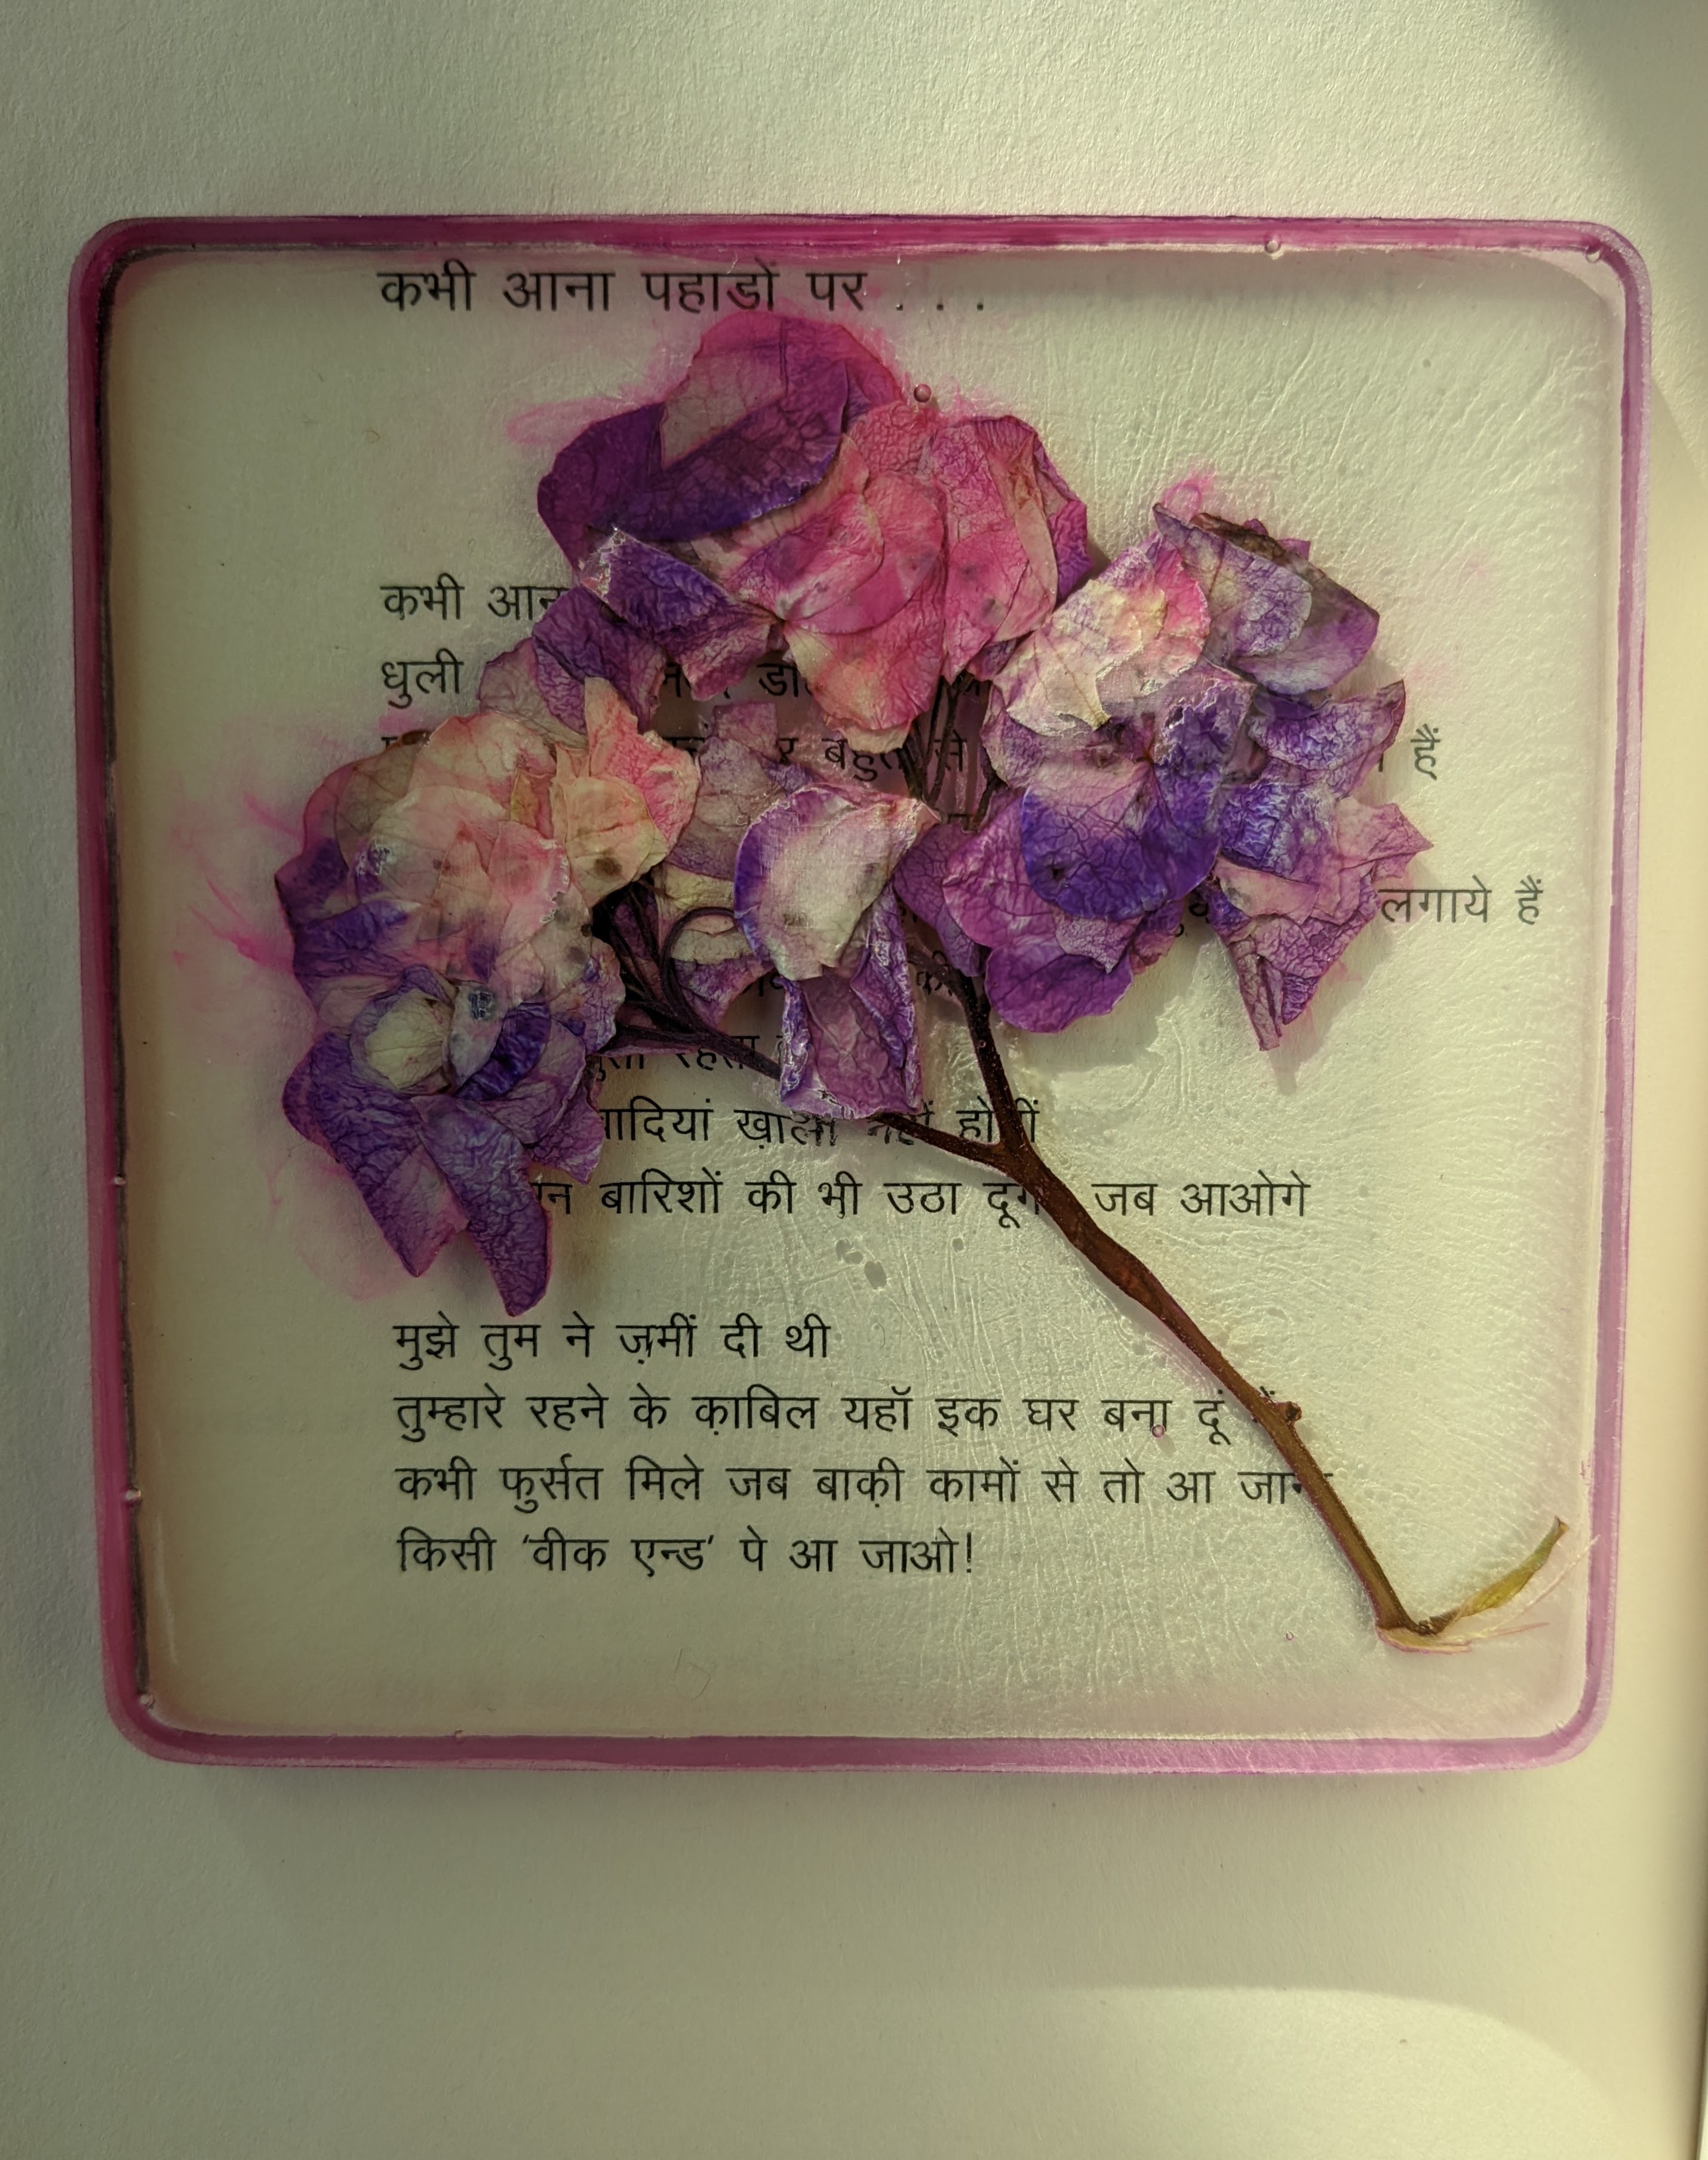 Resin coaster with a pink embedded flower